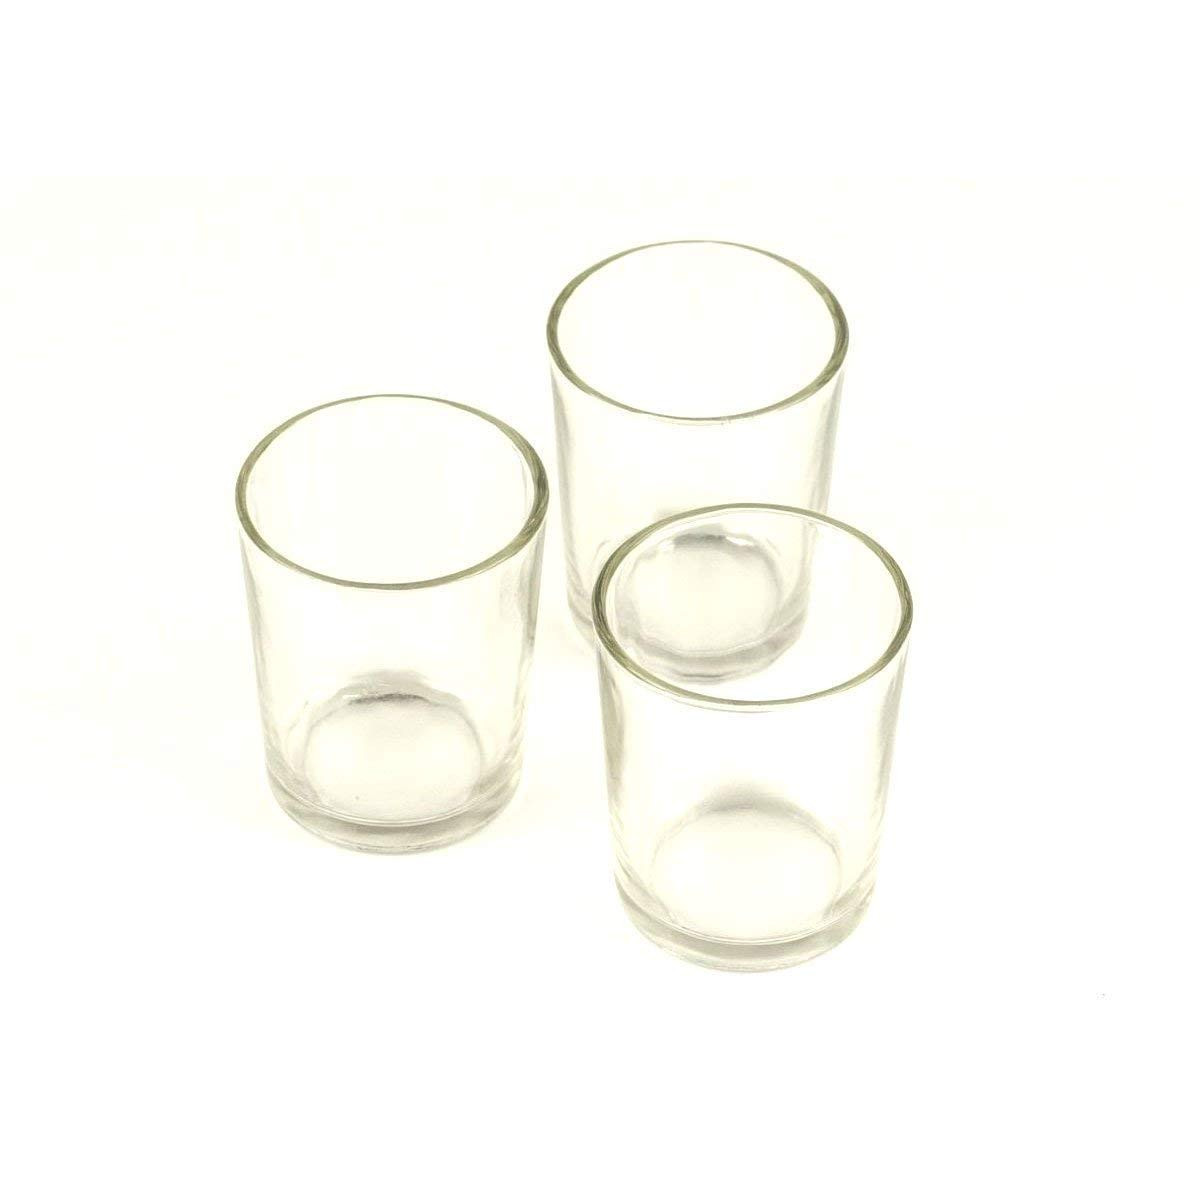 eastland tall cylinder vases of amazon com clear glass votive holders 2 5 pack of 12 home kitchen throughout 51peo9vaadl sl1200